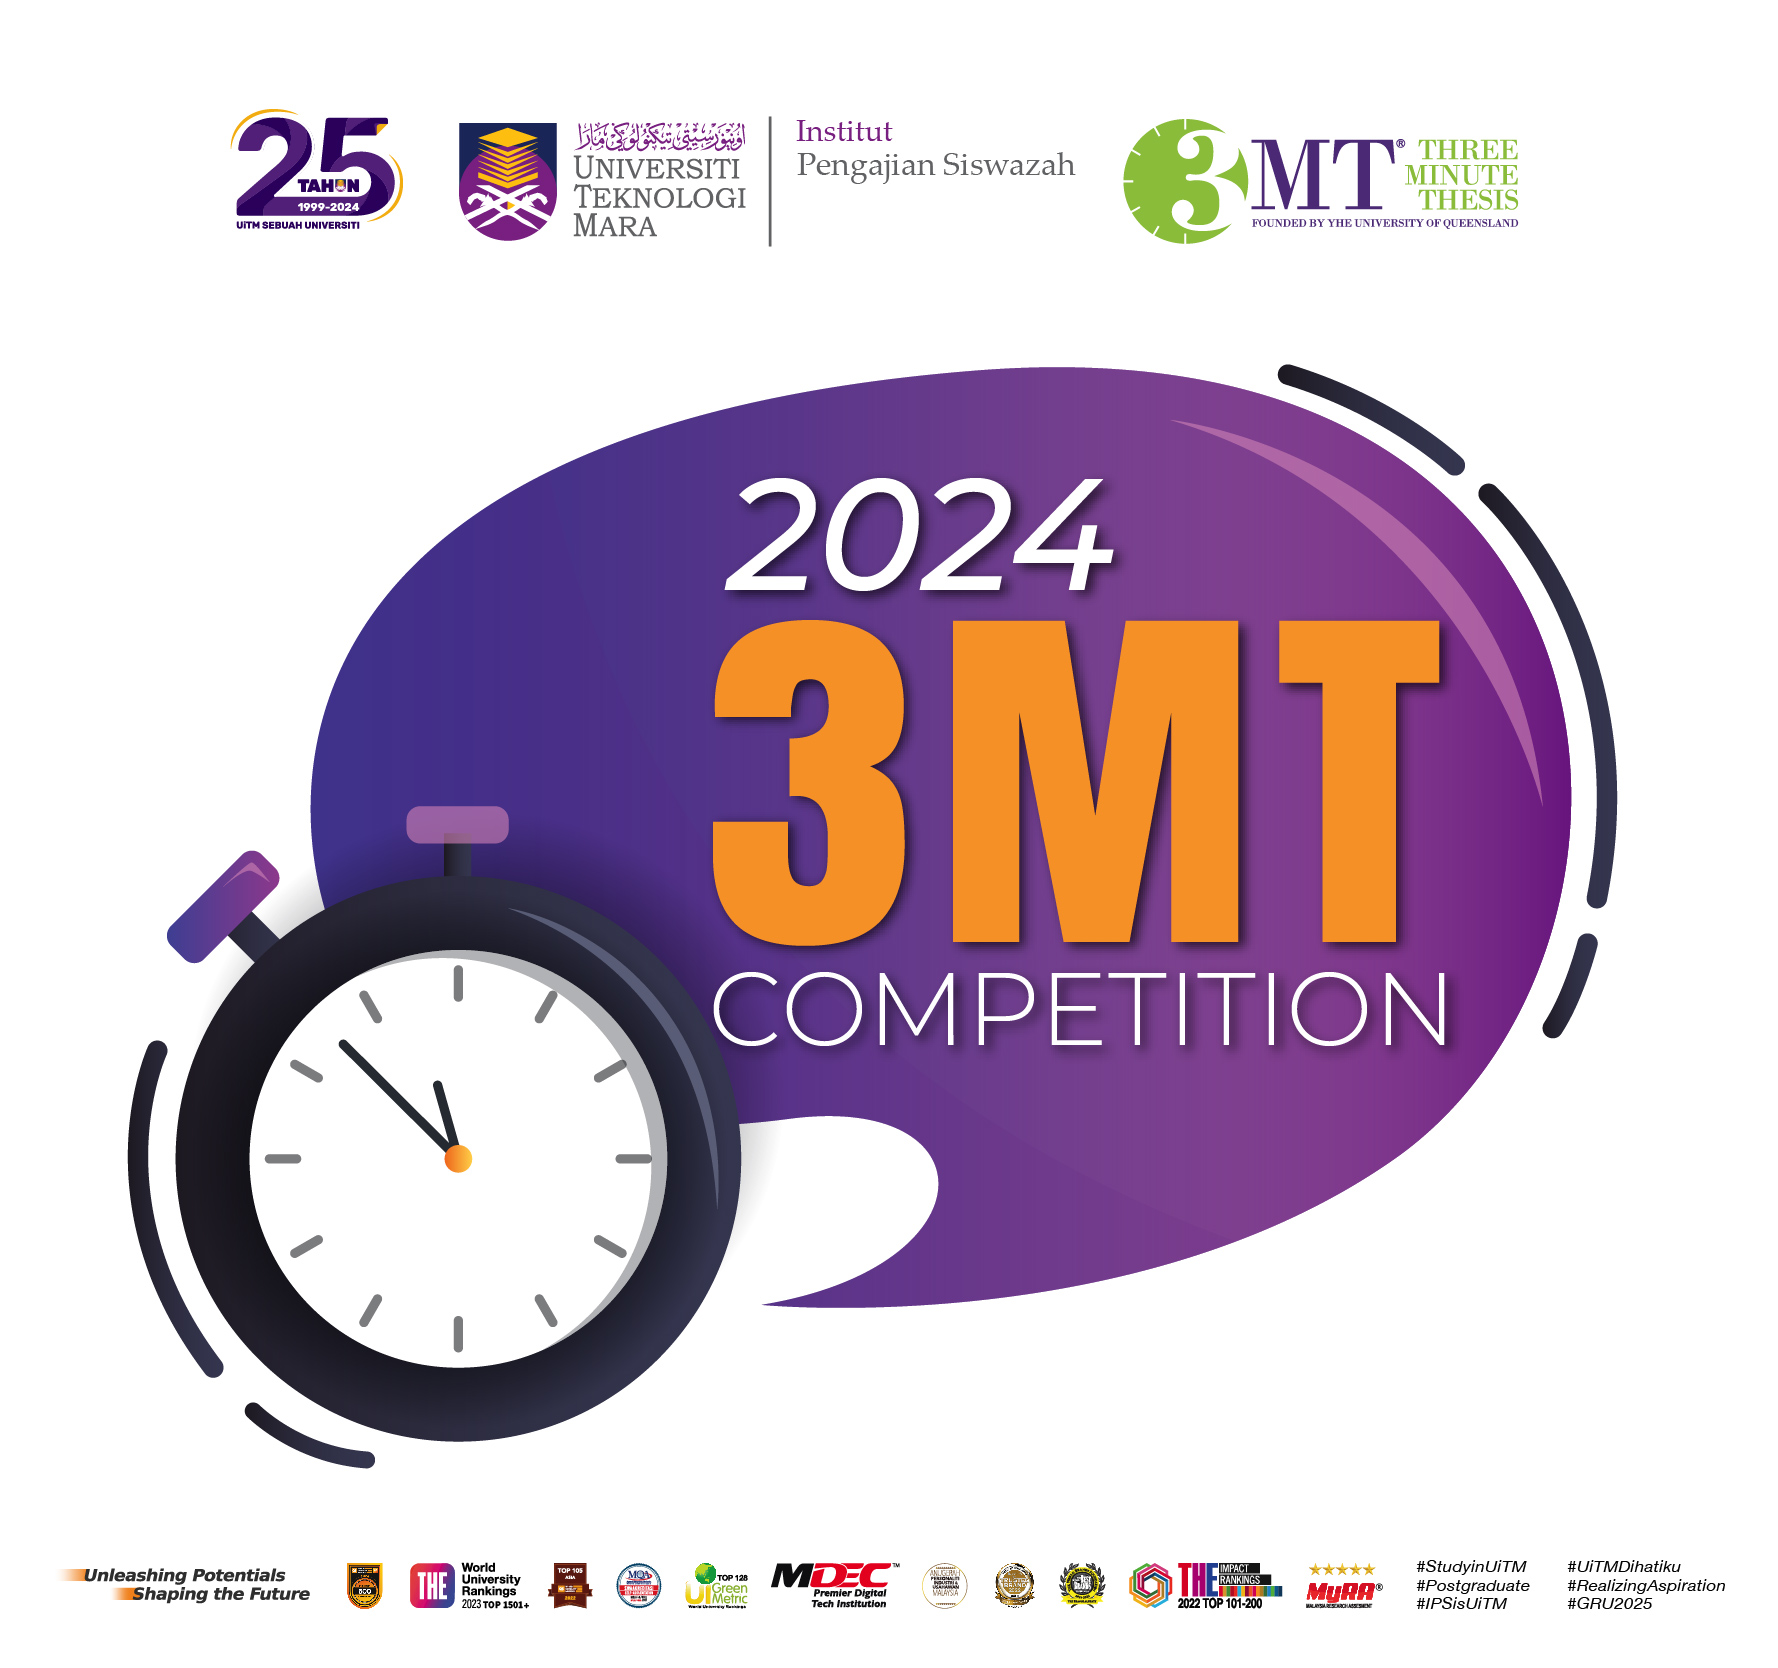 3MT Competition 2024